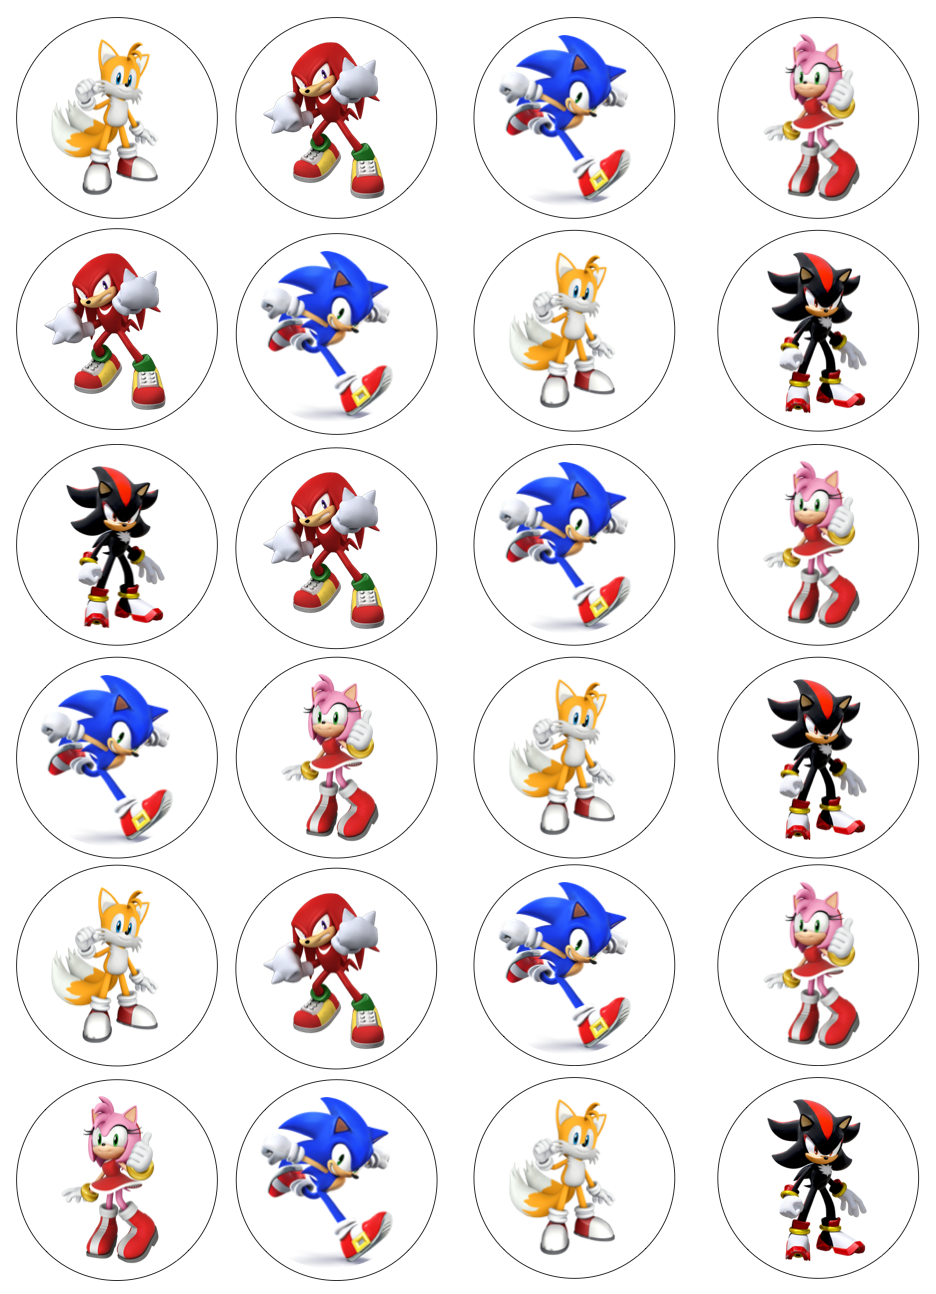 Sonic #1 Cupcake Edible Icing Image Toppers